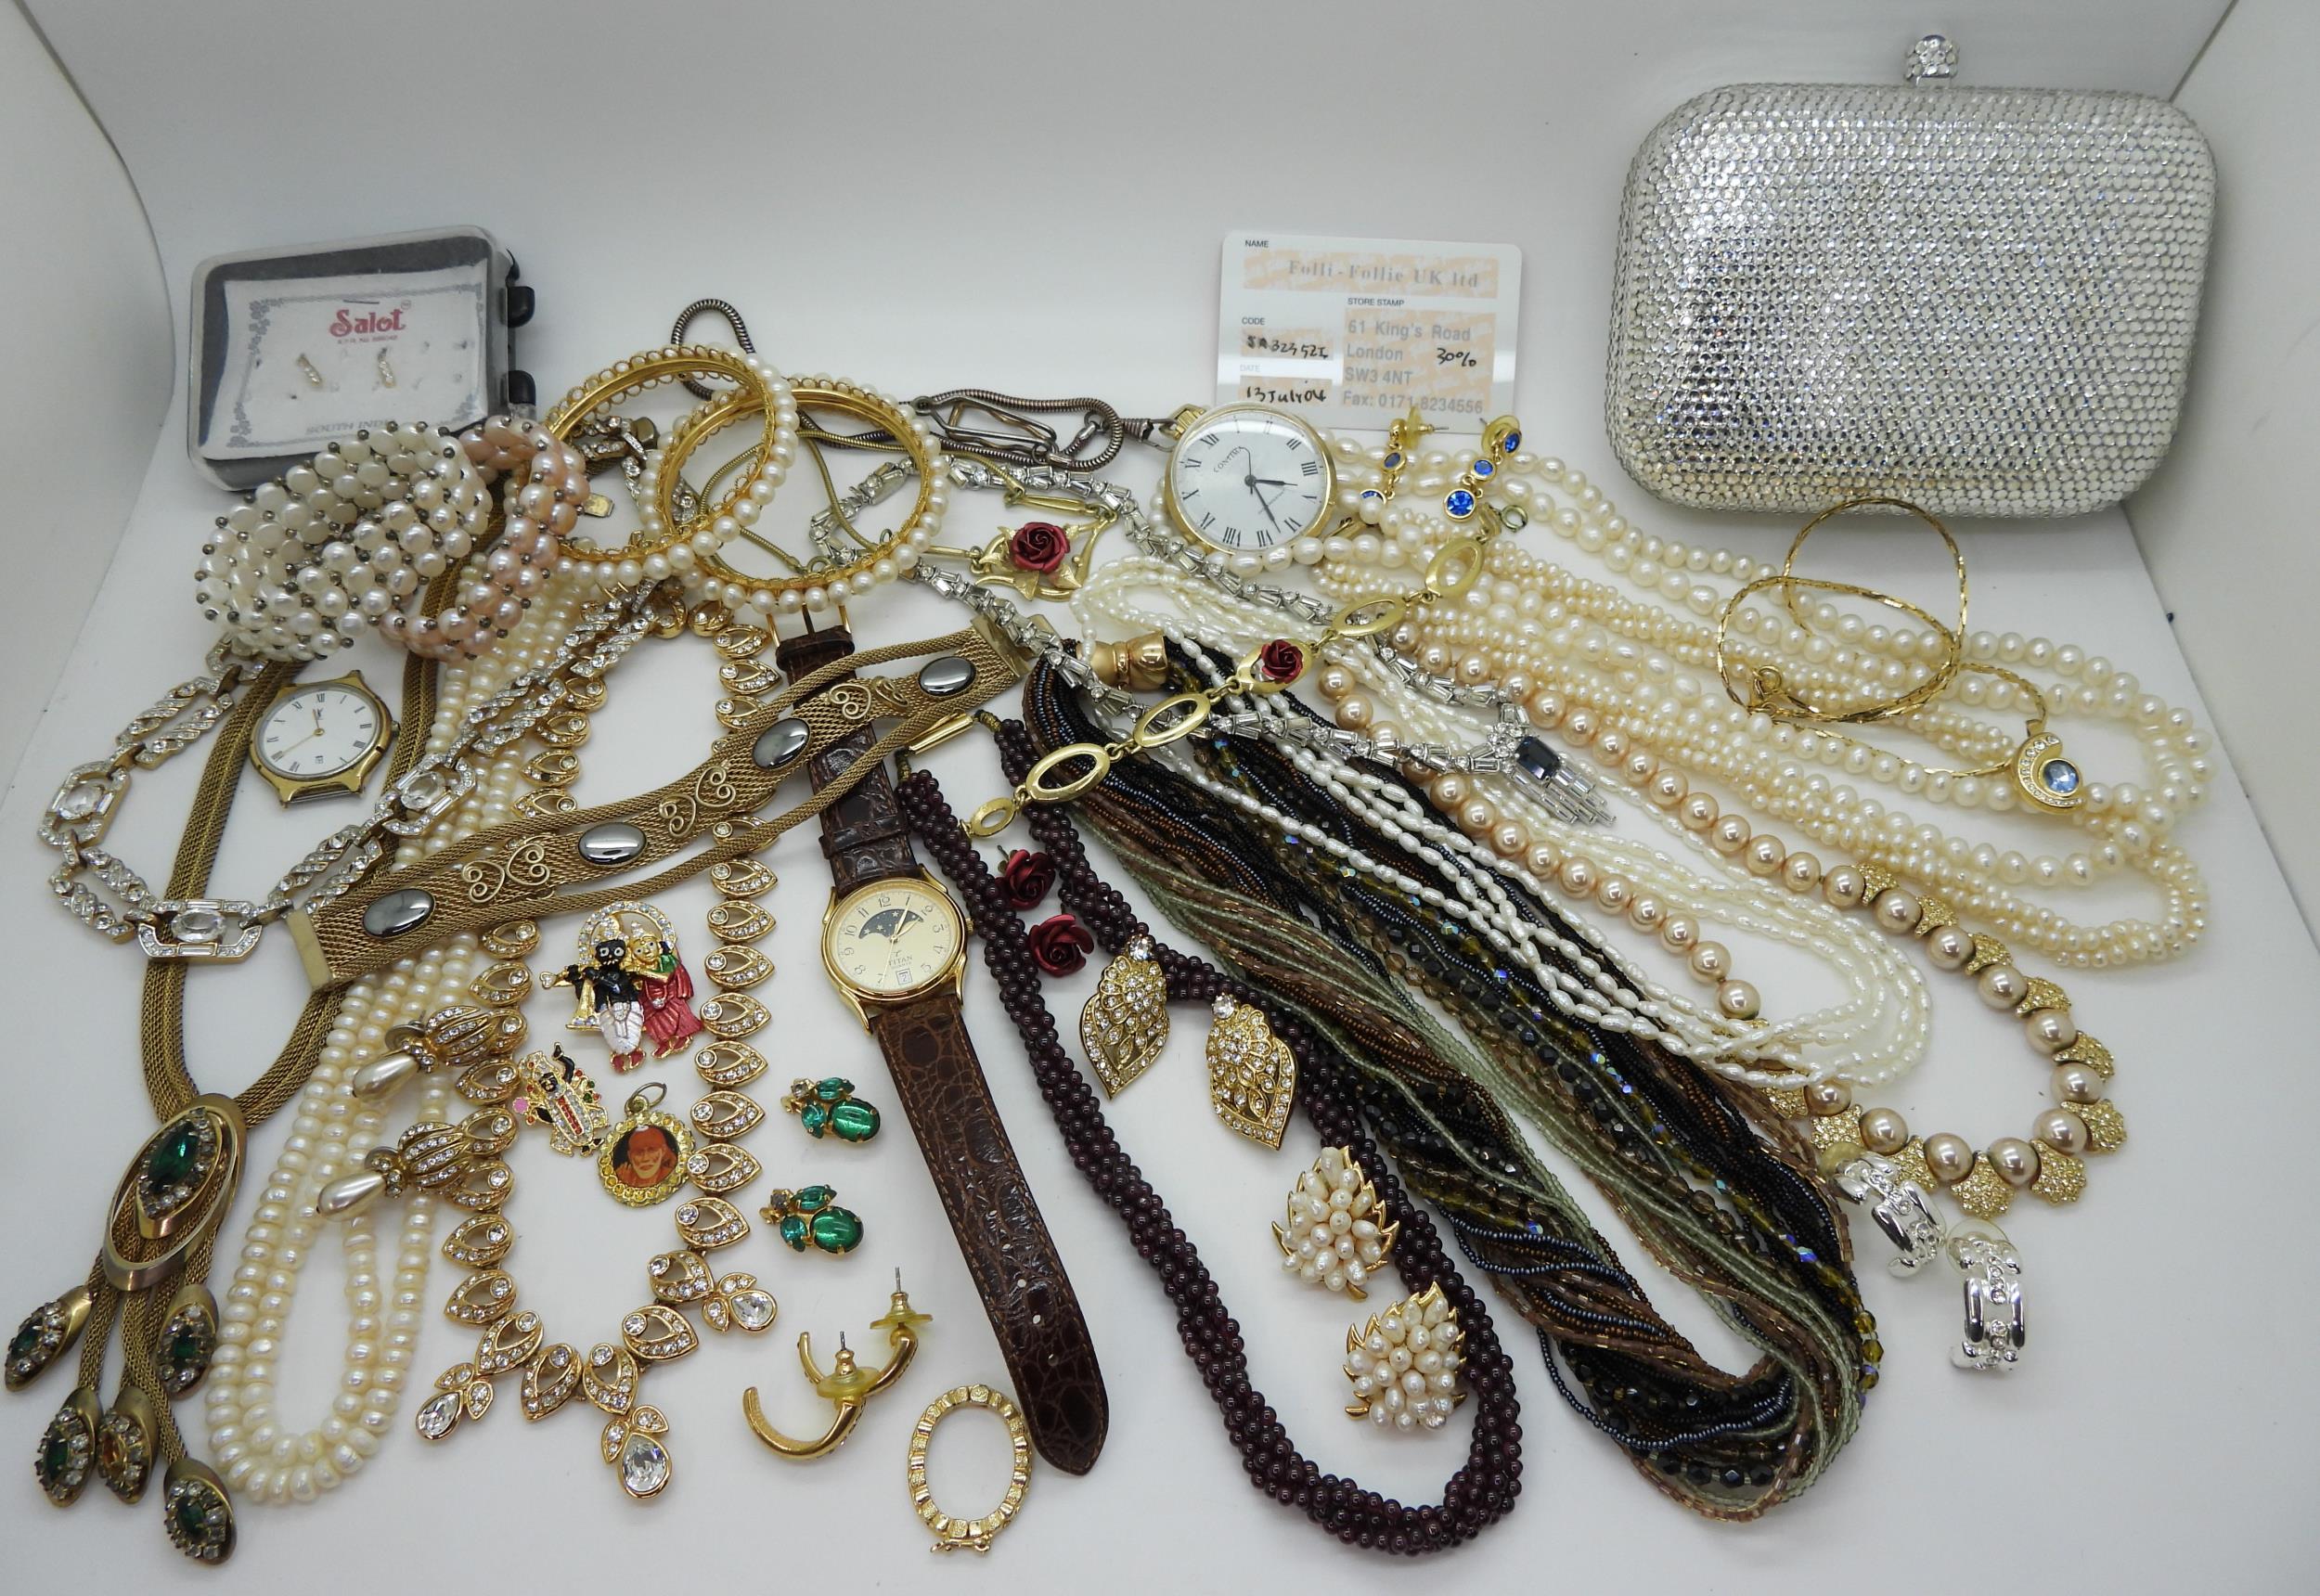 A diamante handbag by Karen Kelly, garnet beads, strings of cultured pearls and bracelets, further - Image 2 of 3